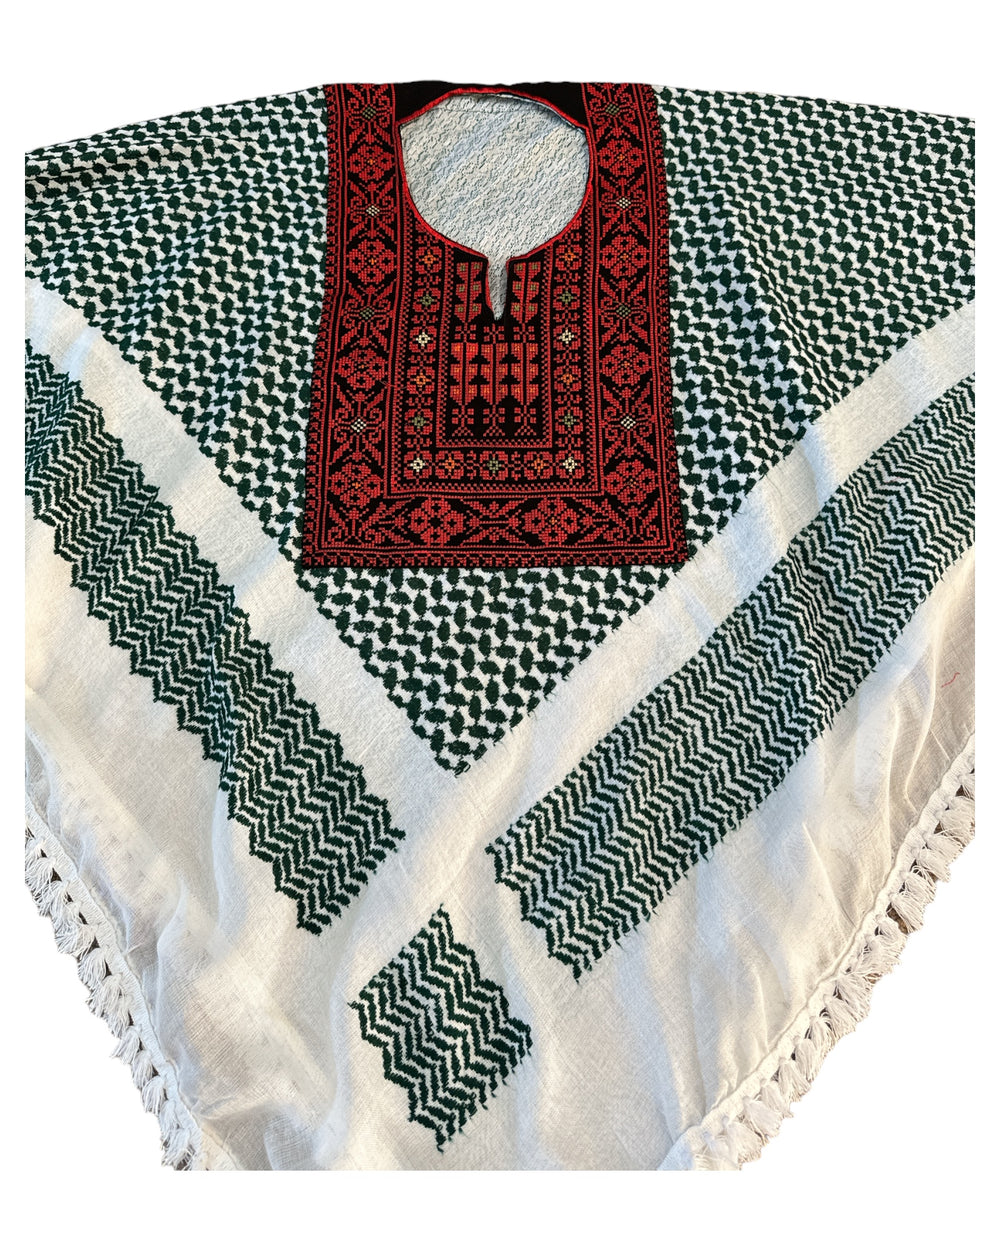 Hand Stitched Green & White Poncho with Keffiyeh design and Embroidery